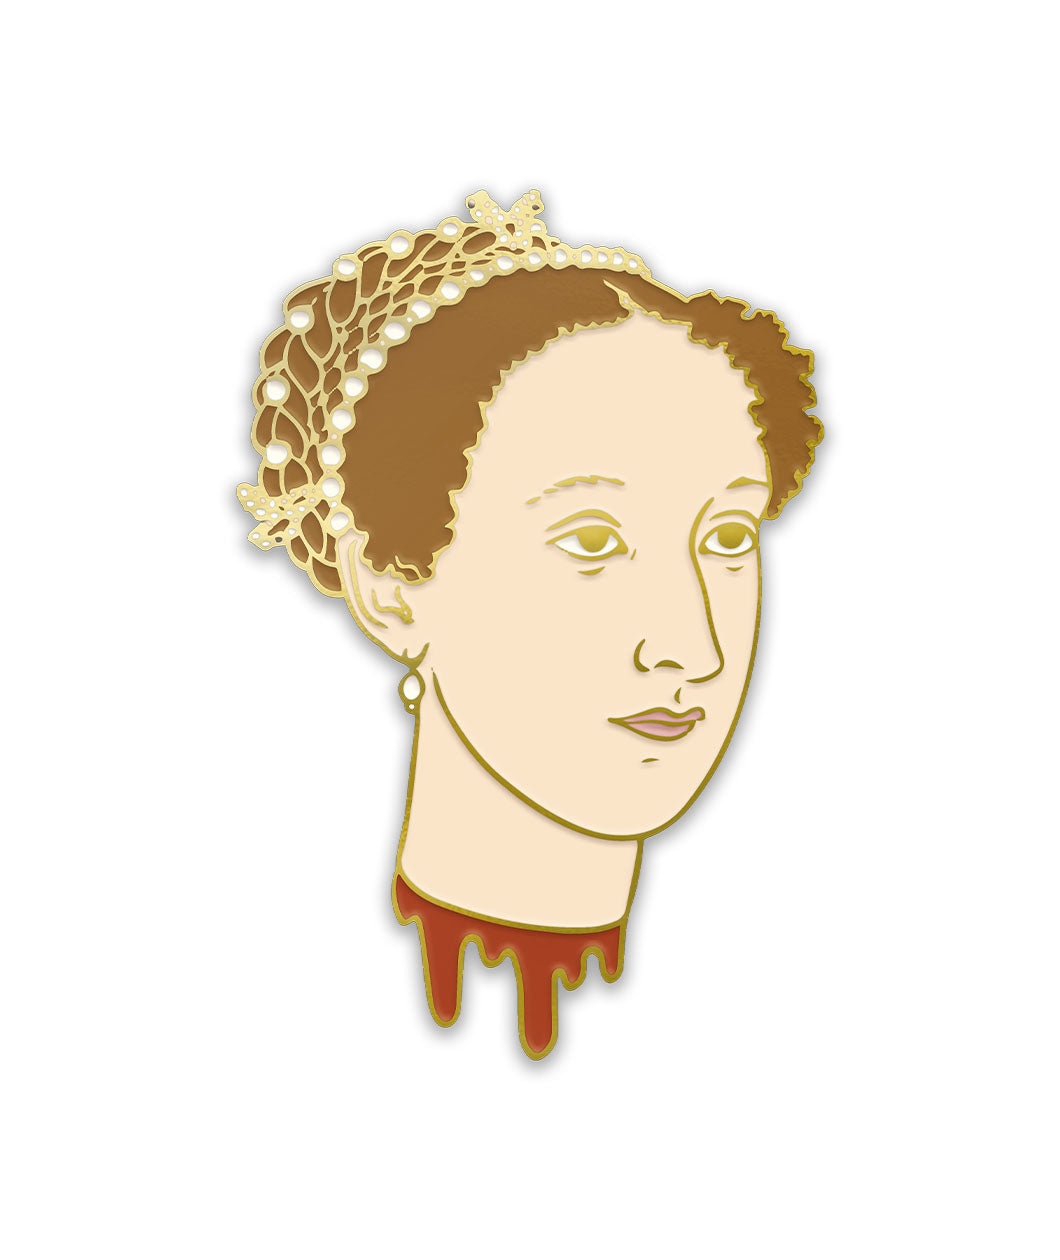 A Mary's head pin with her hair up in a jewel adorned net. Her hood has been severed and there is blood dripping down the next. From Noble Blood. 